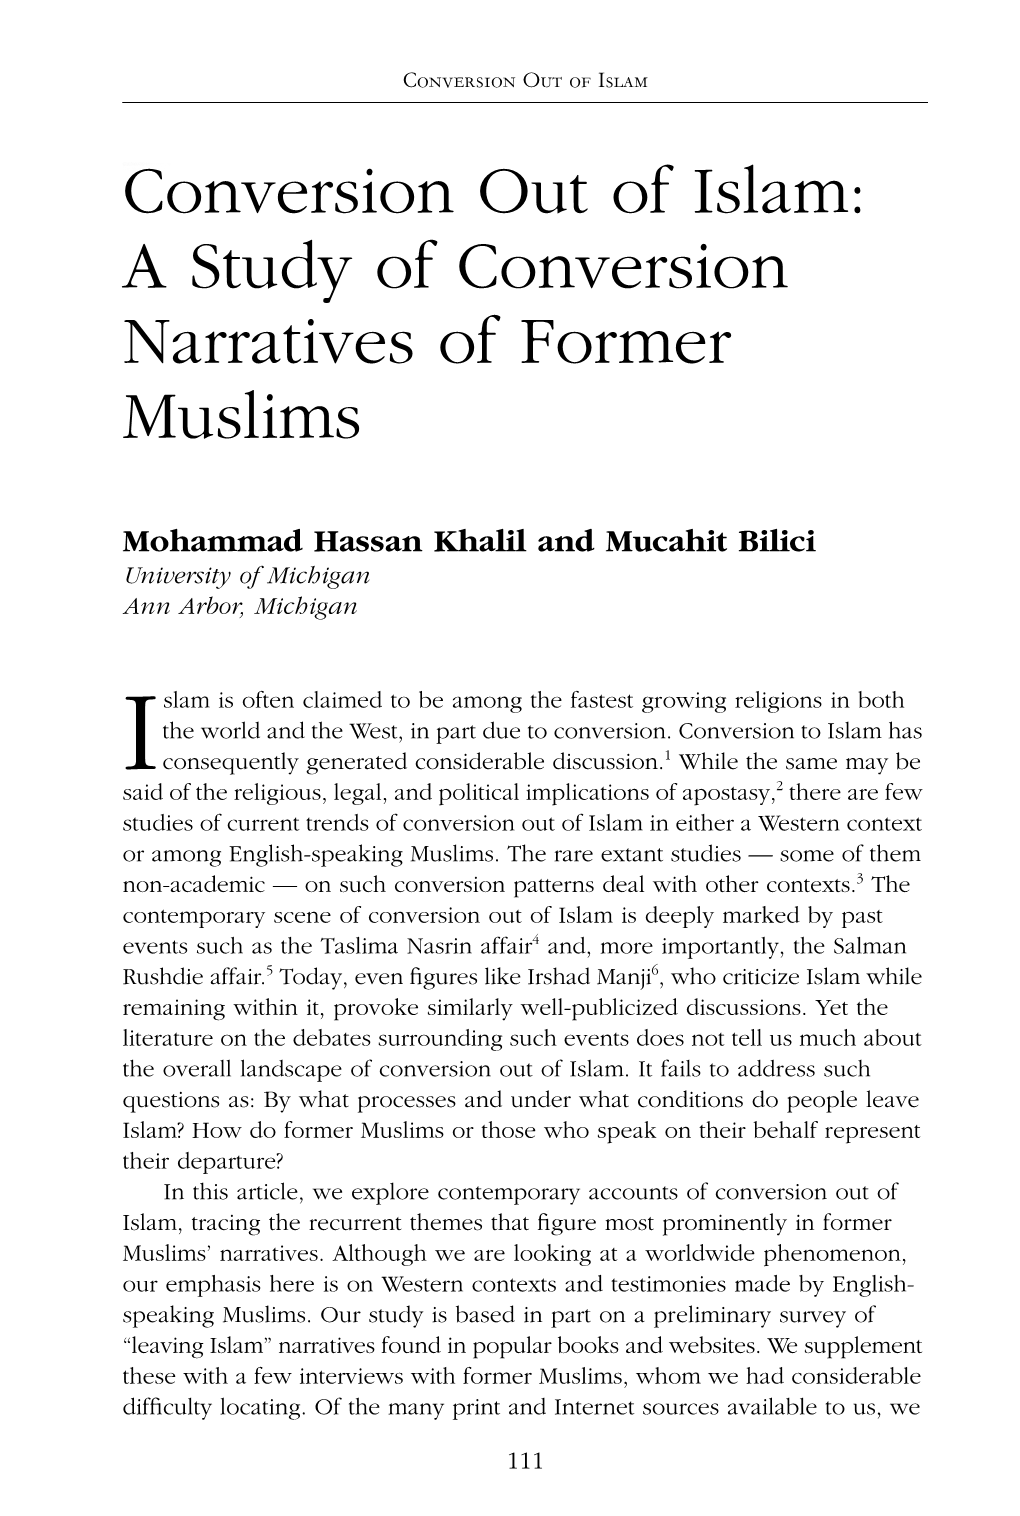 A Study of Conversion Narratives of Former Muslims